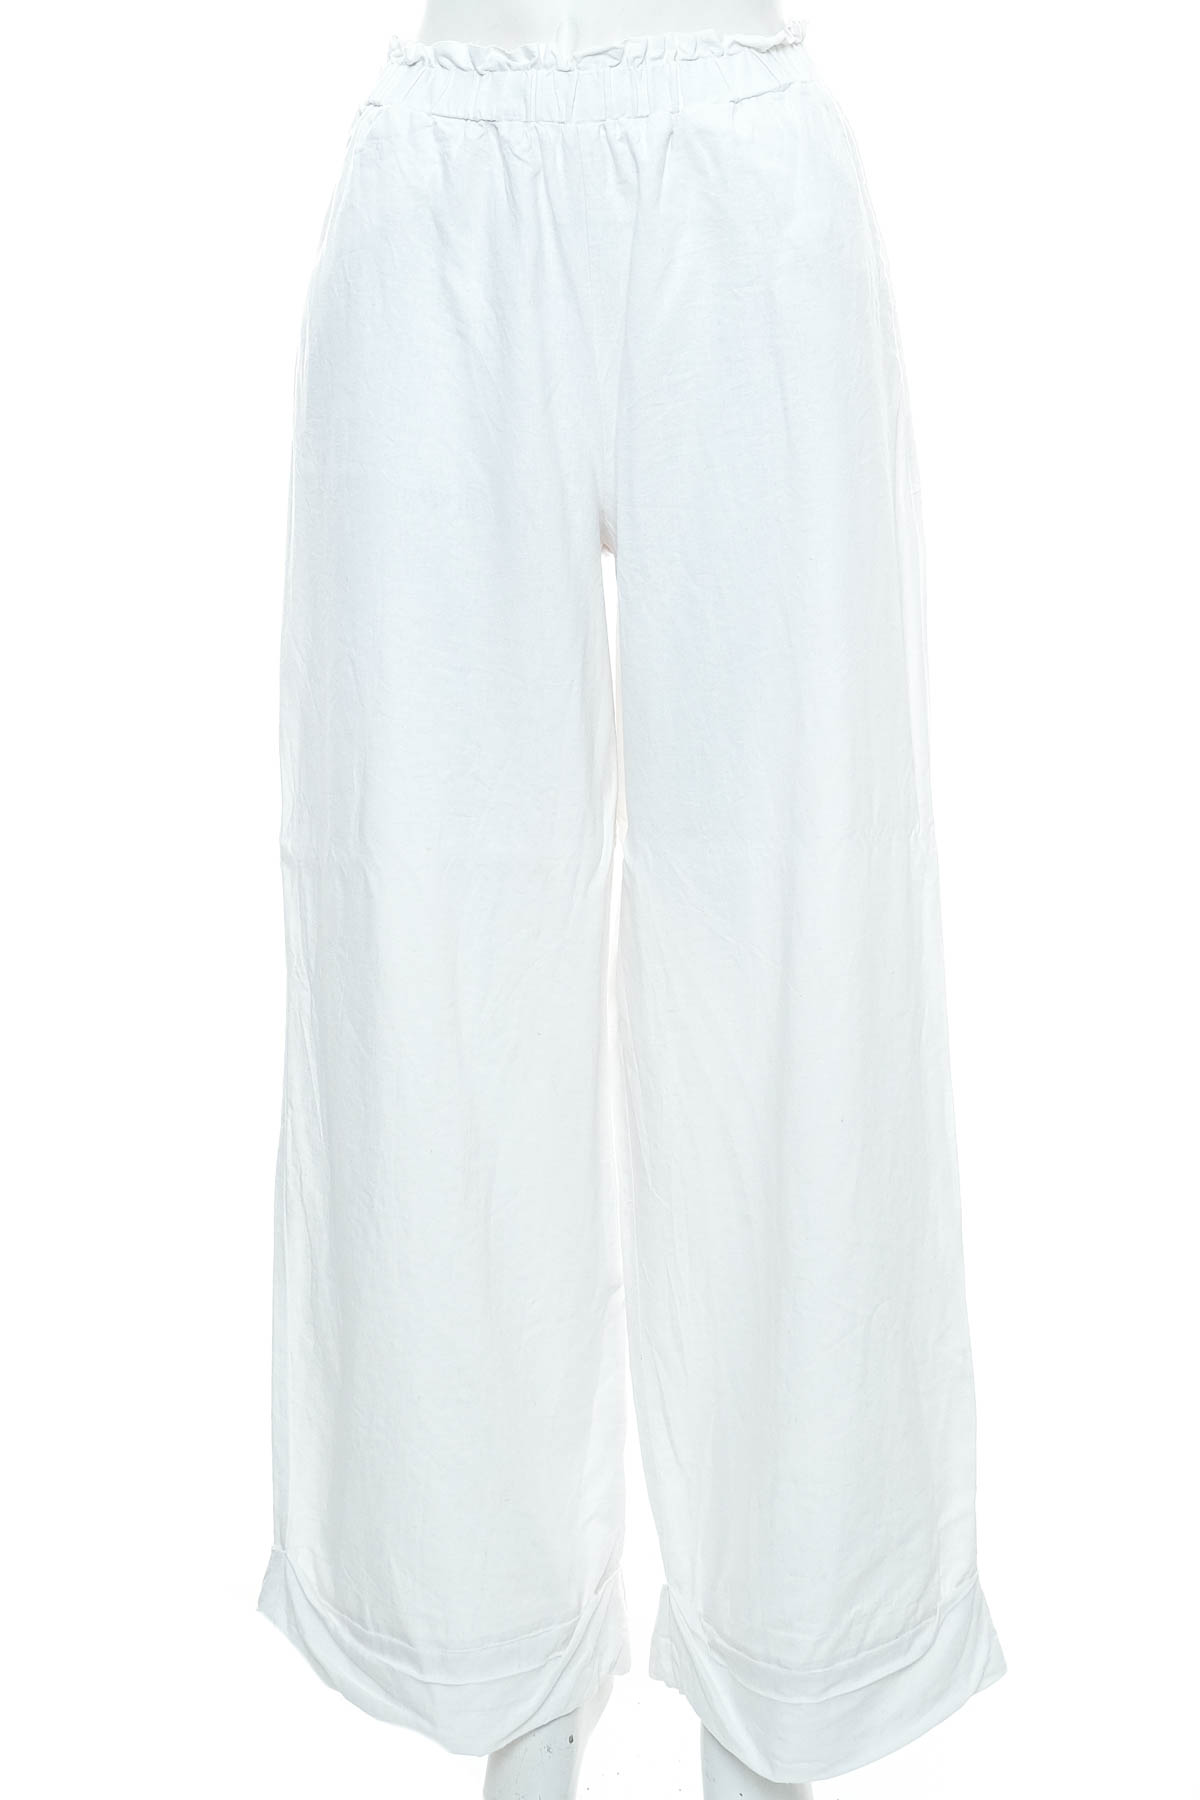 Women's trousers - Glassons - 0